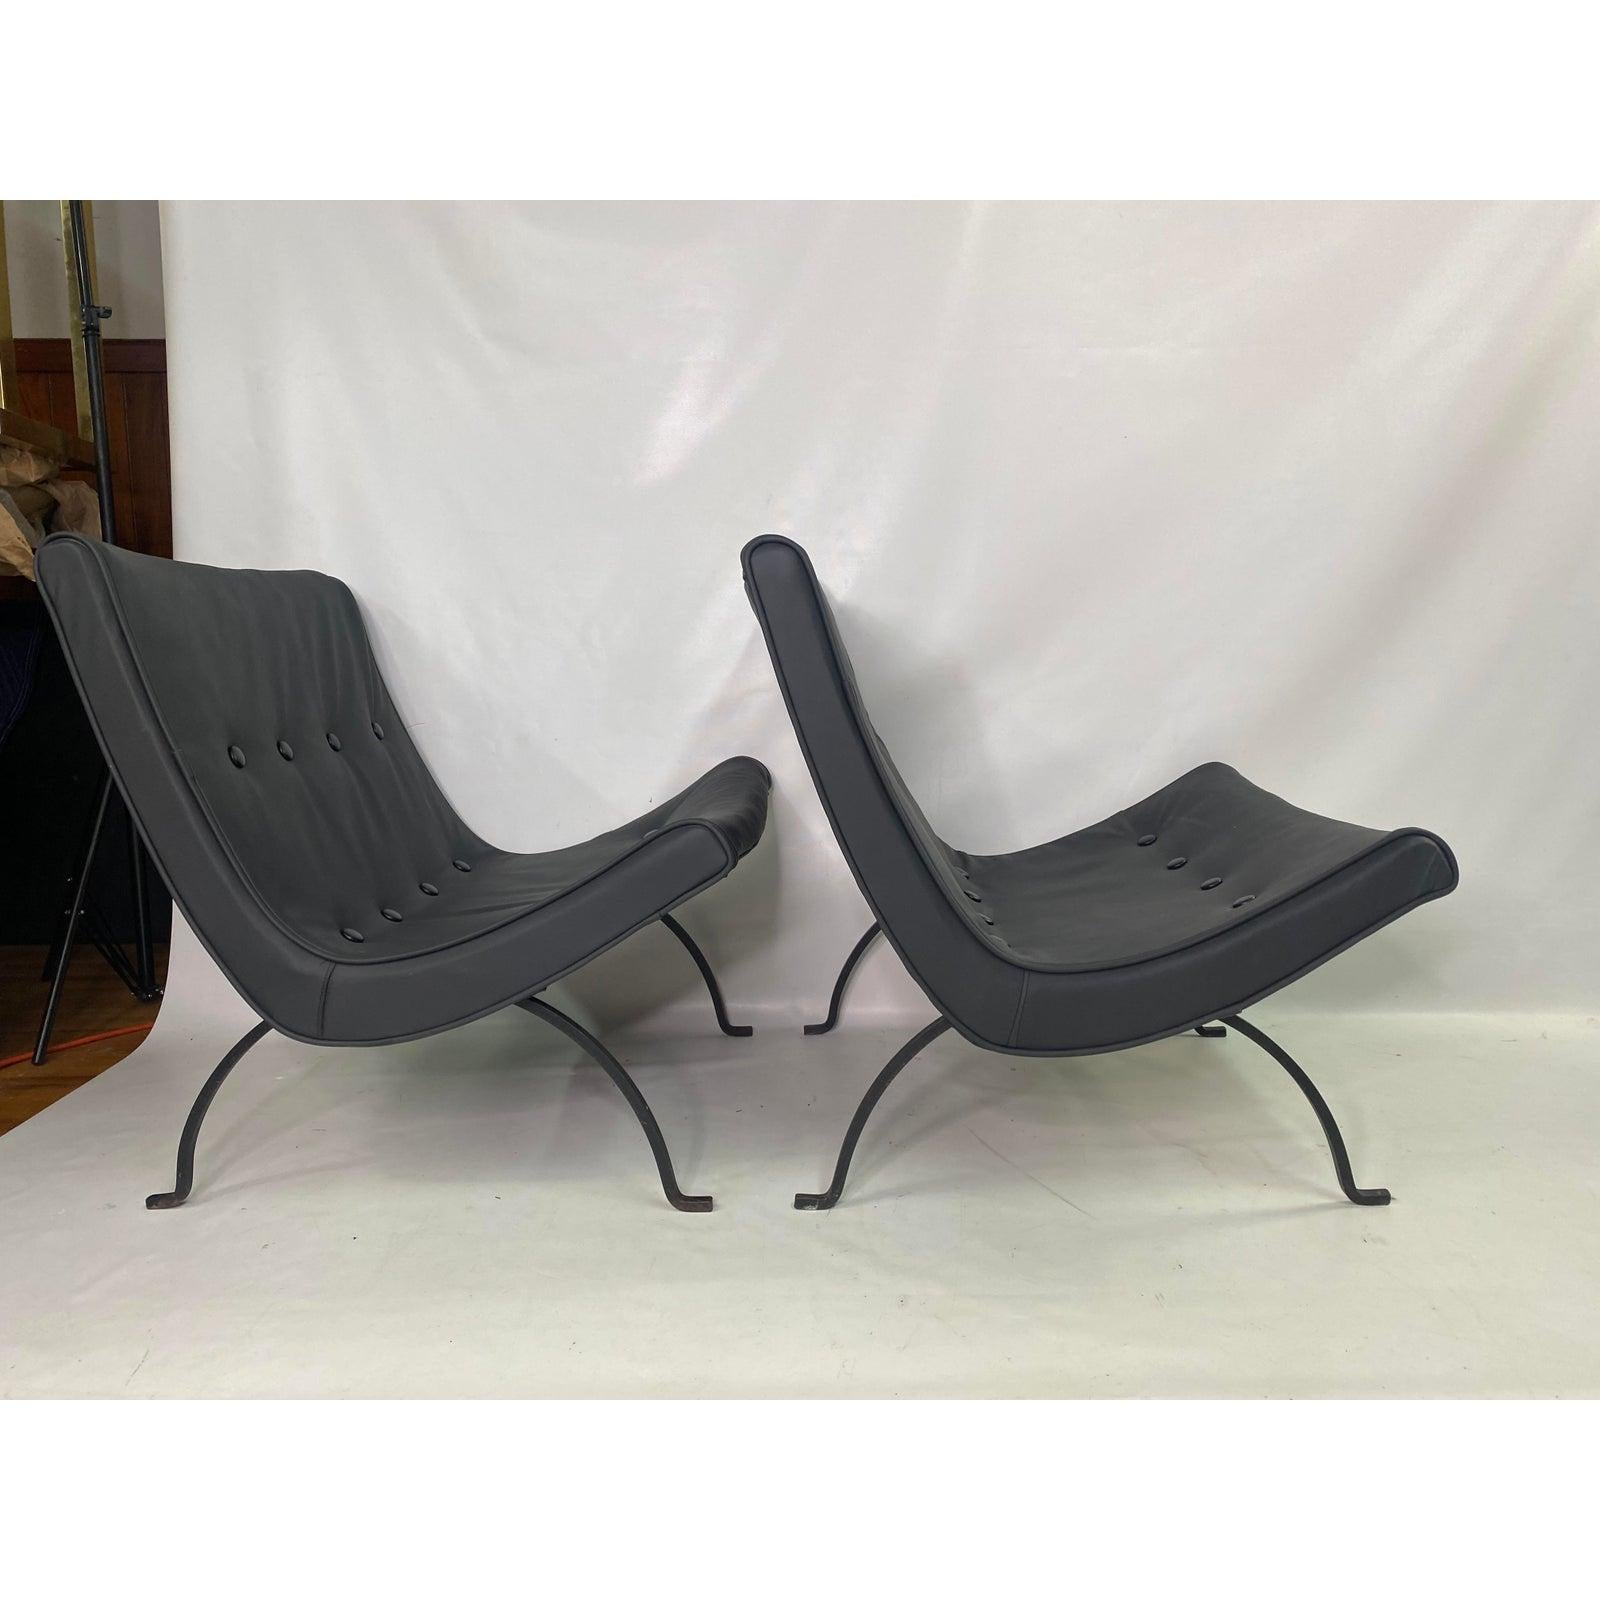 American Mid-Century Modern Leather Milo Baughman Scoop Chairs a Pair For Sale